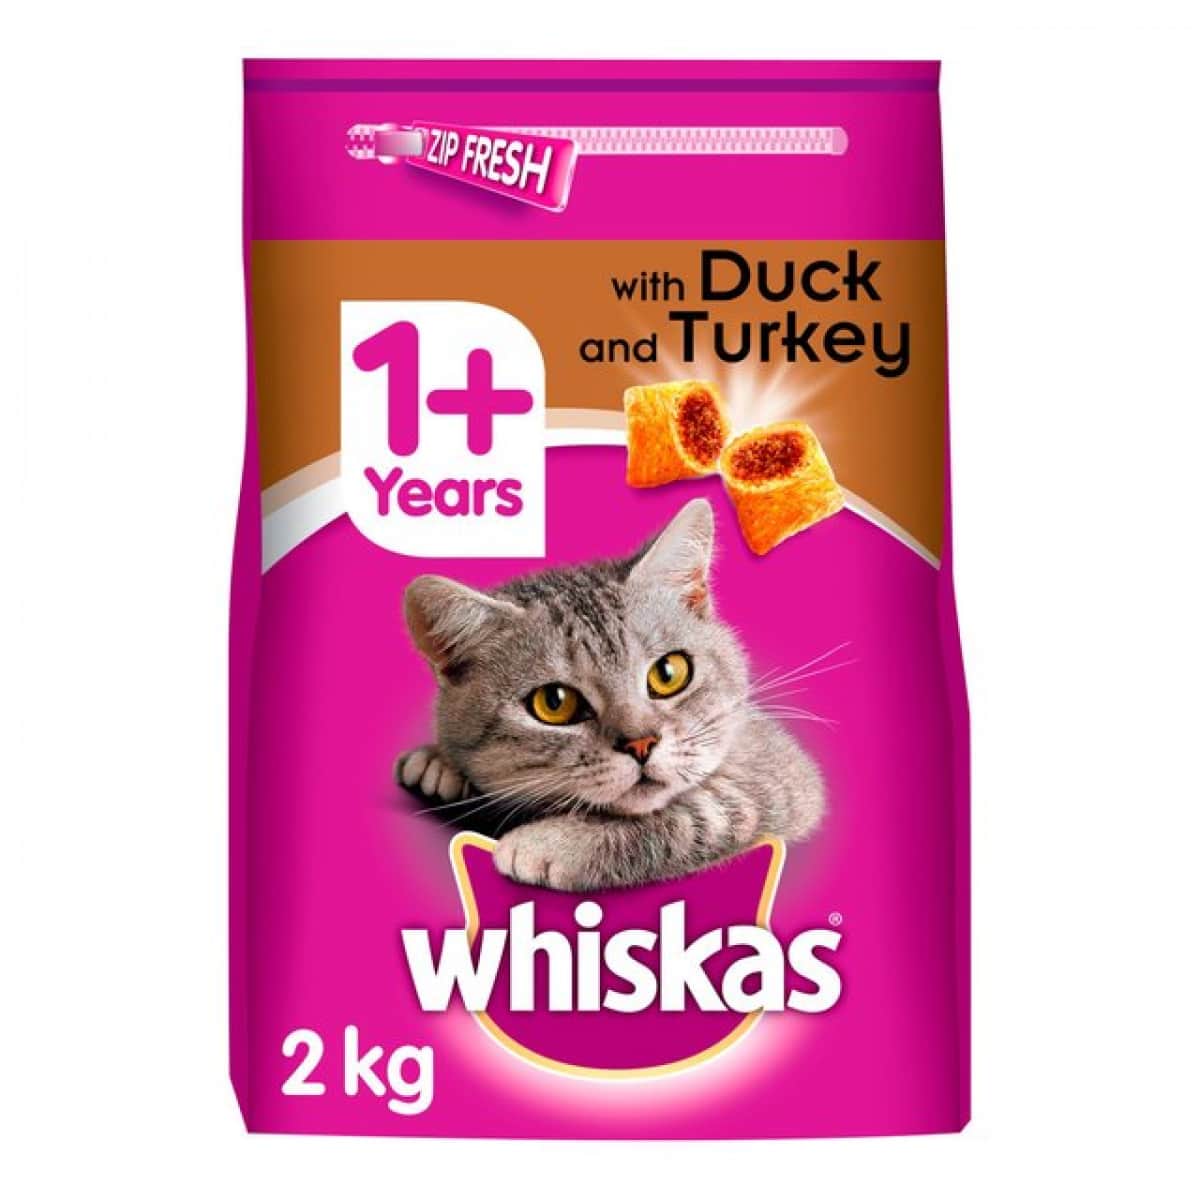 Whiskas Dry Food Adult 1+ Turkey & Duck 2kg – Pawfect Supplies Ltd Product Image